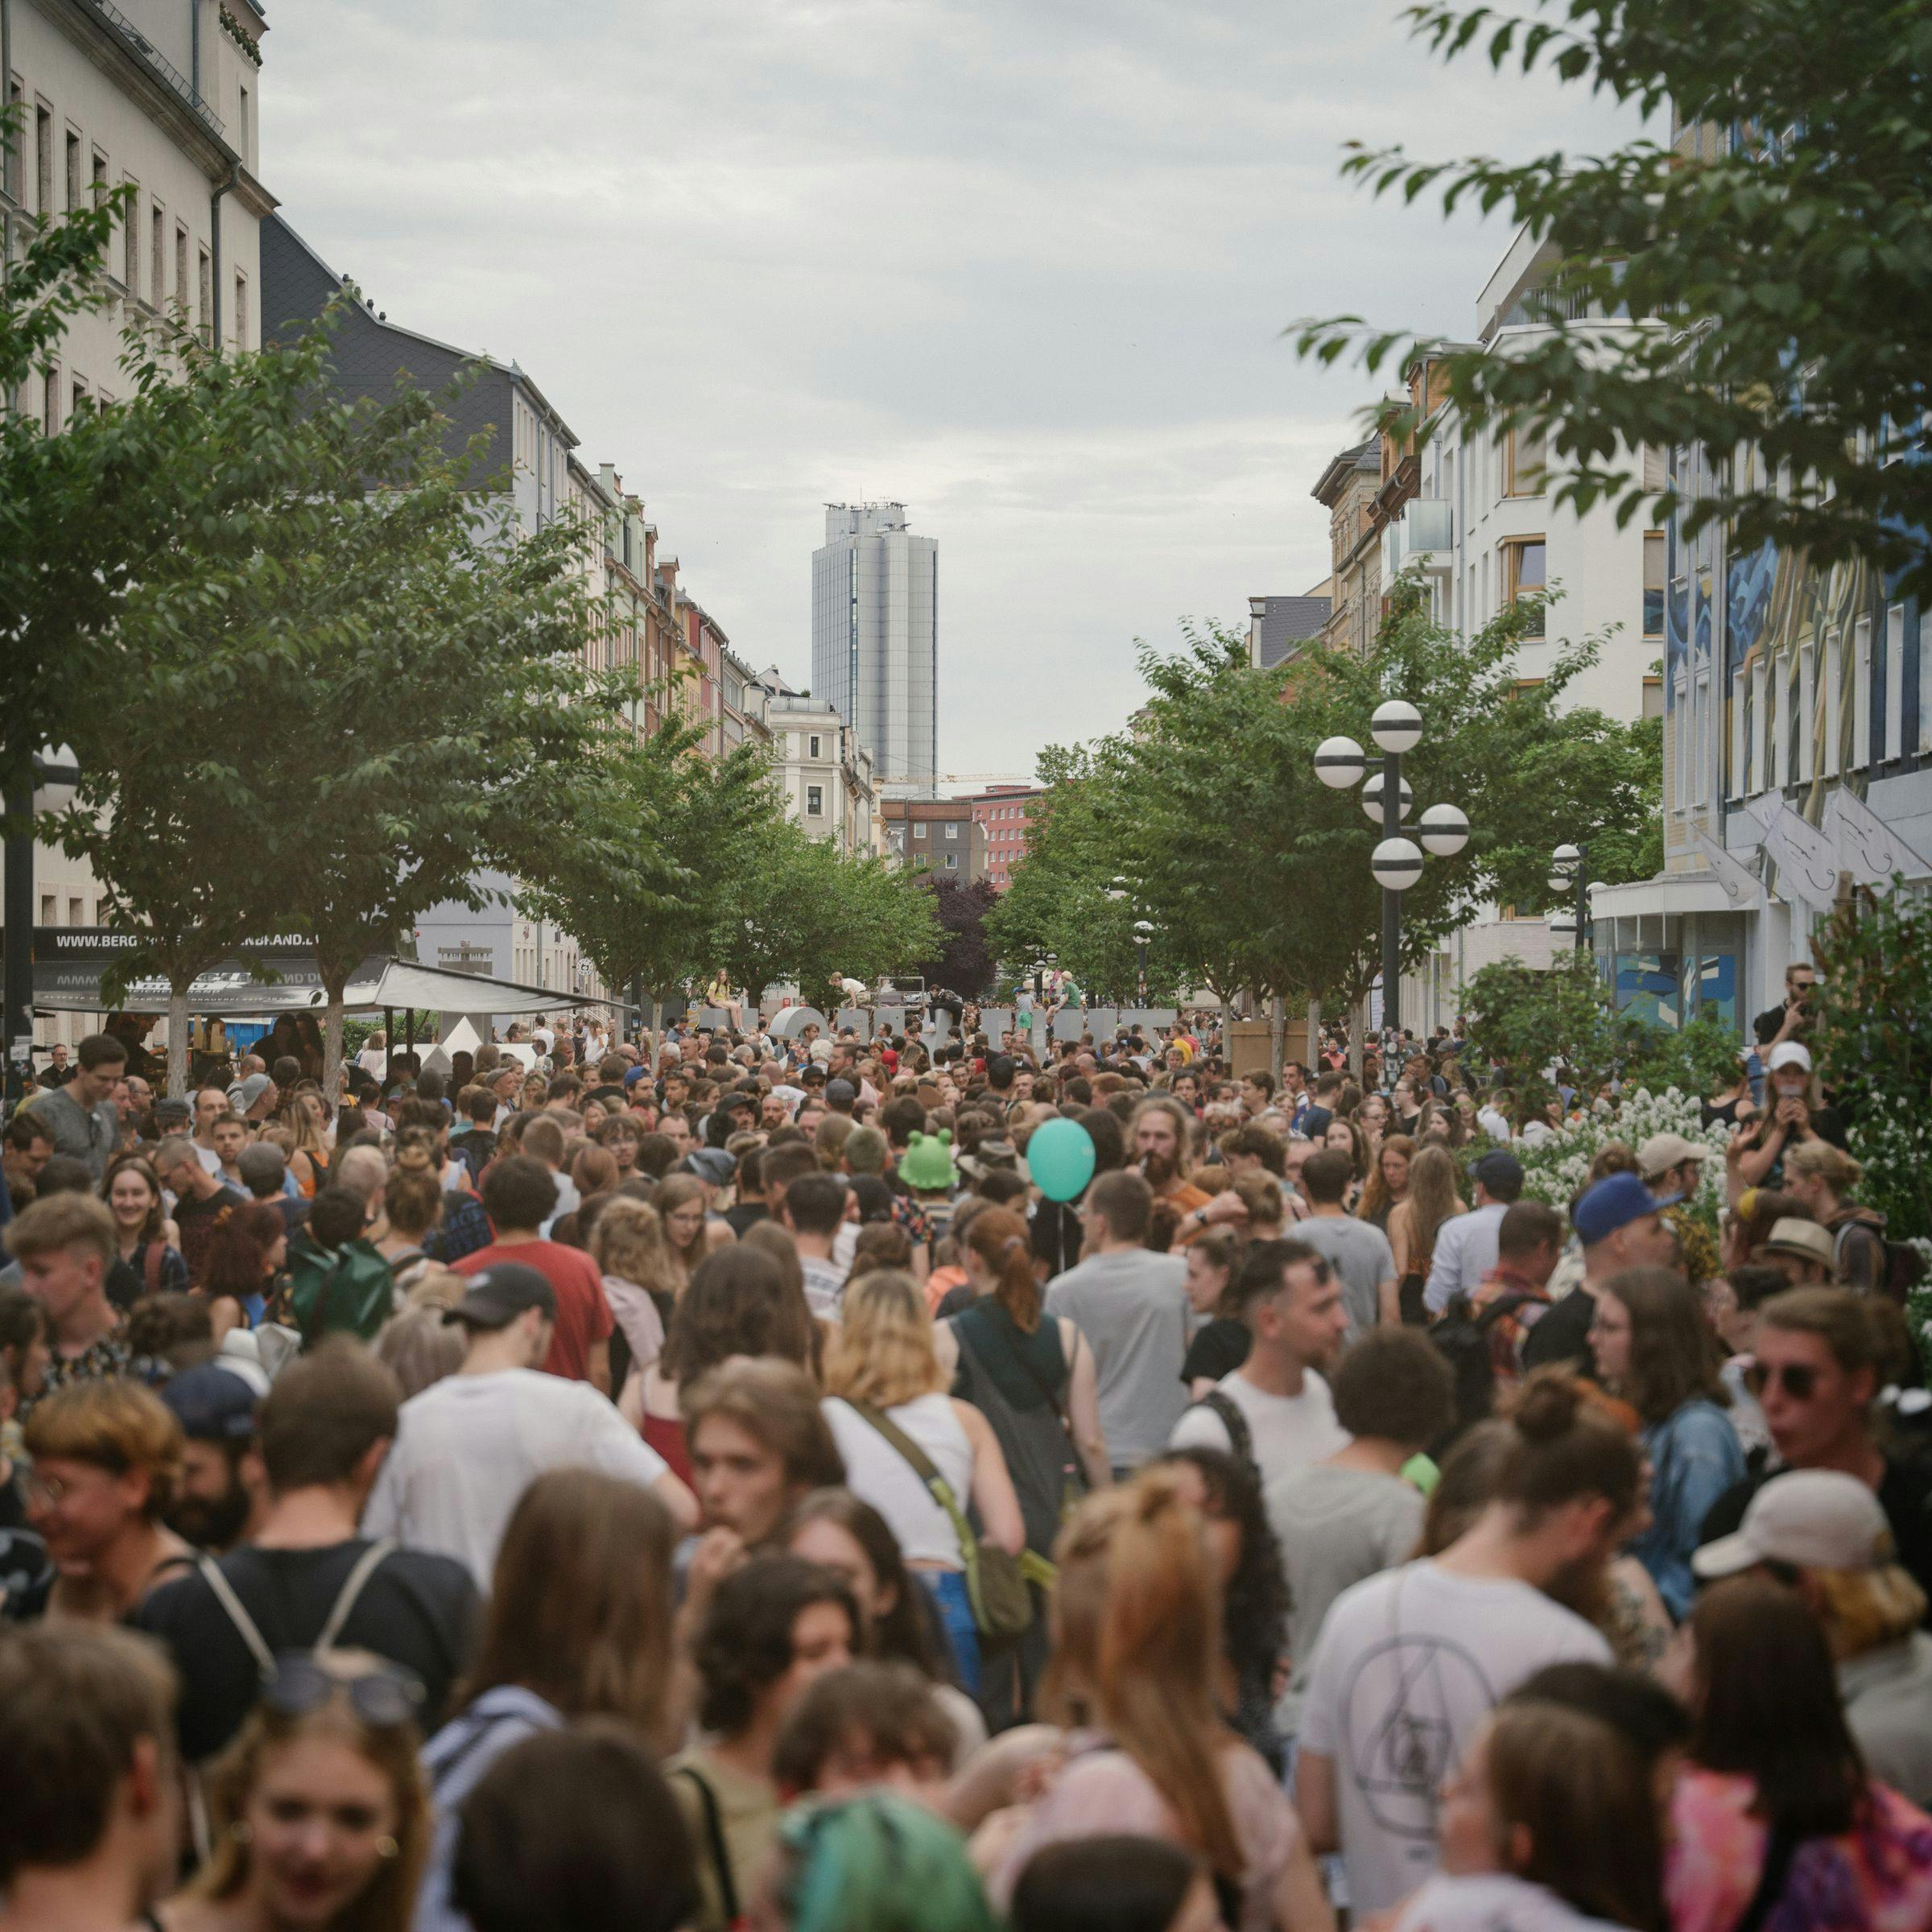 A crowd of people is standing in the streets of Chemnitz looking towards the Dorint Hotel.